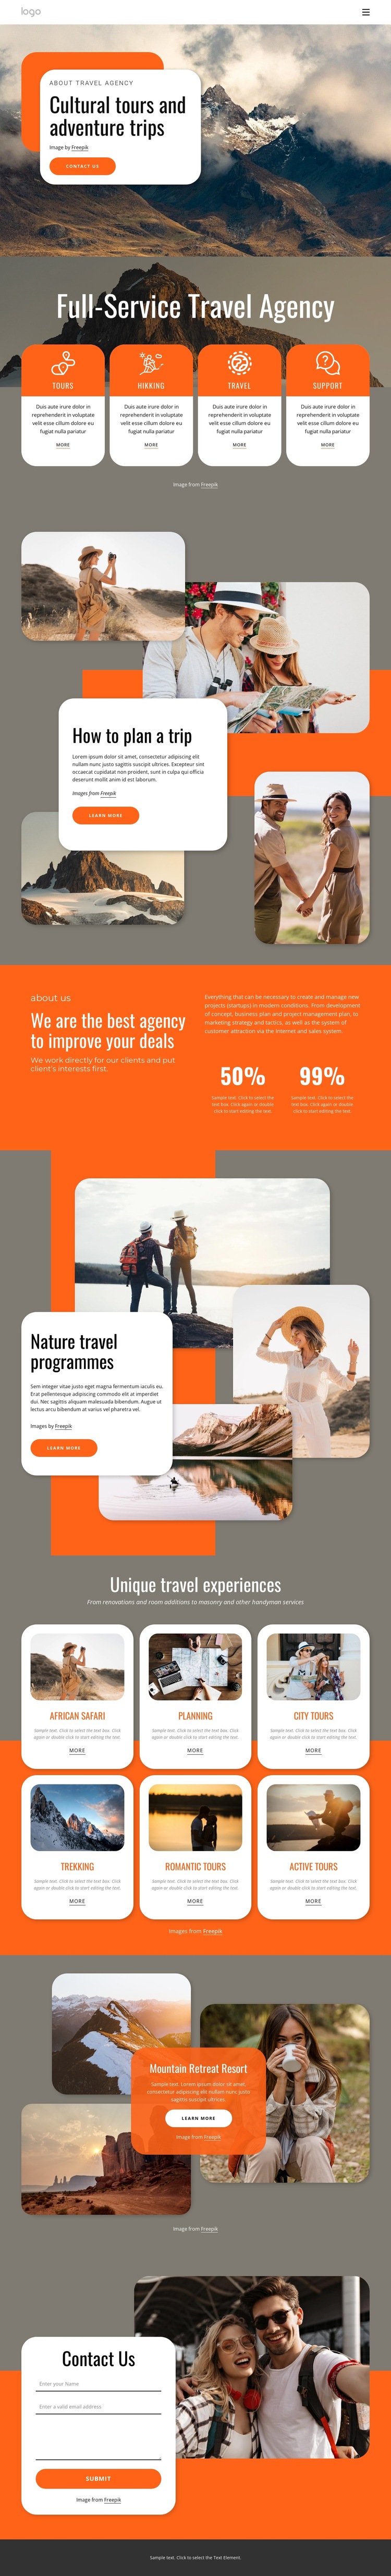 Group travel for all ages HTML5 Template